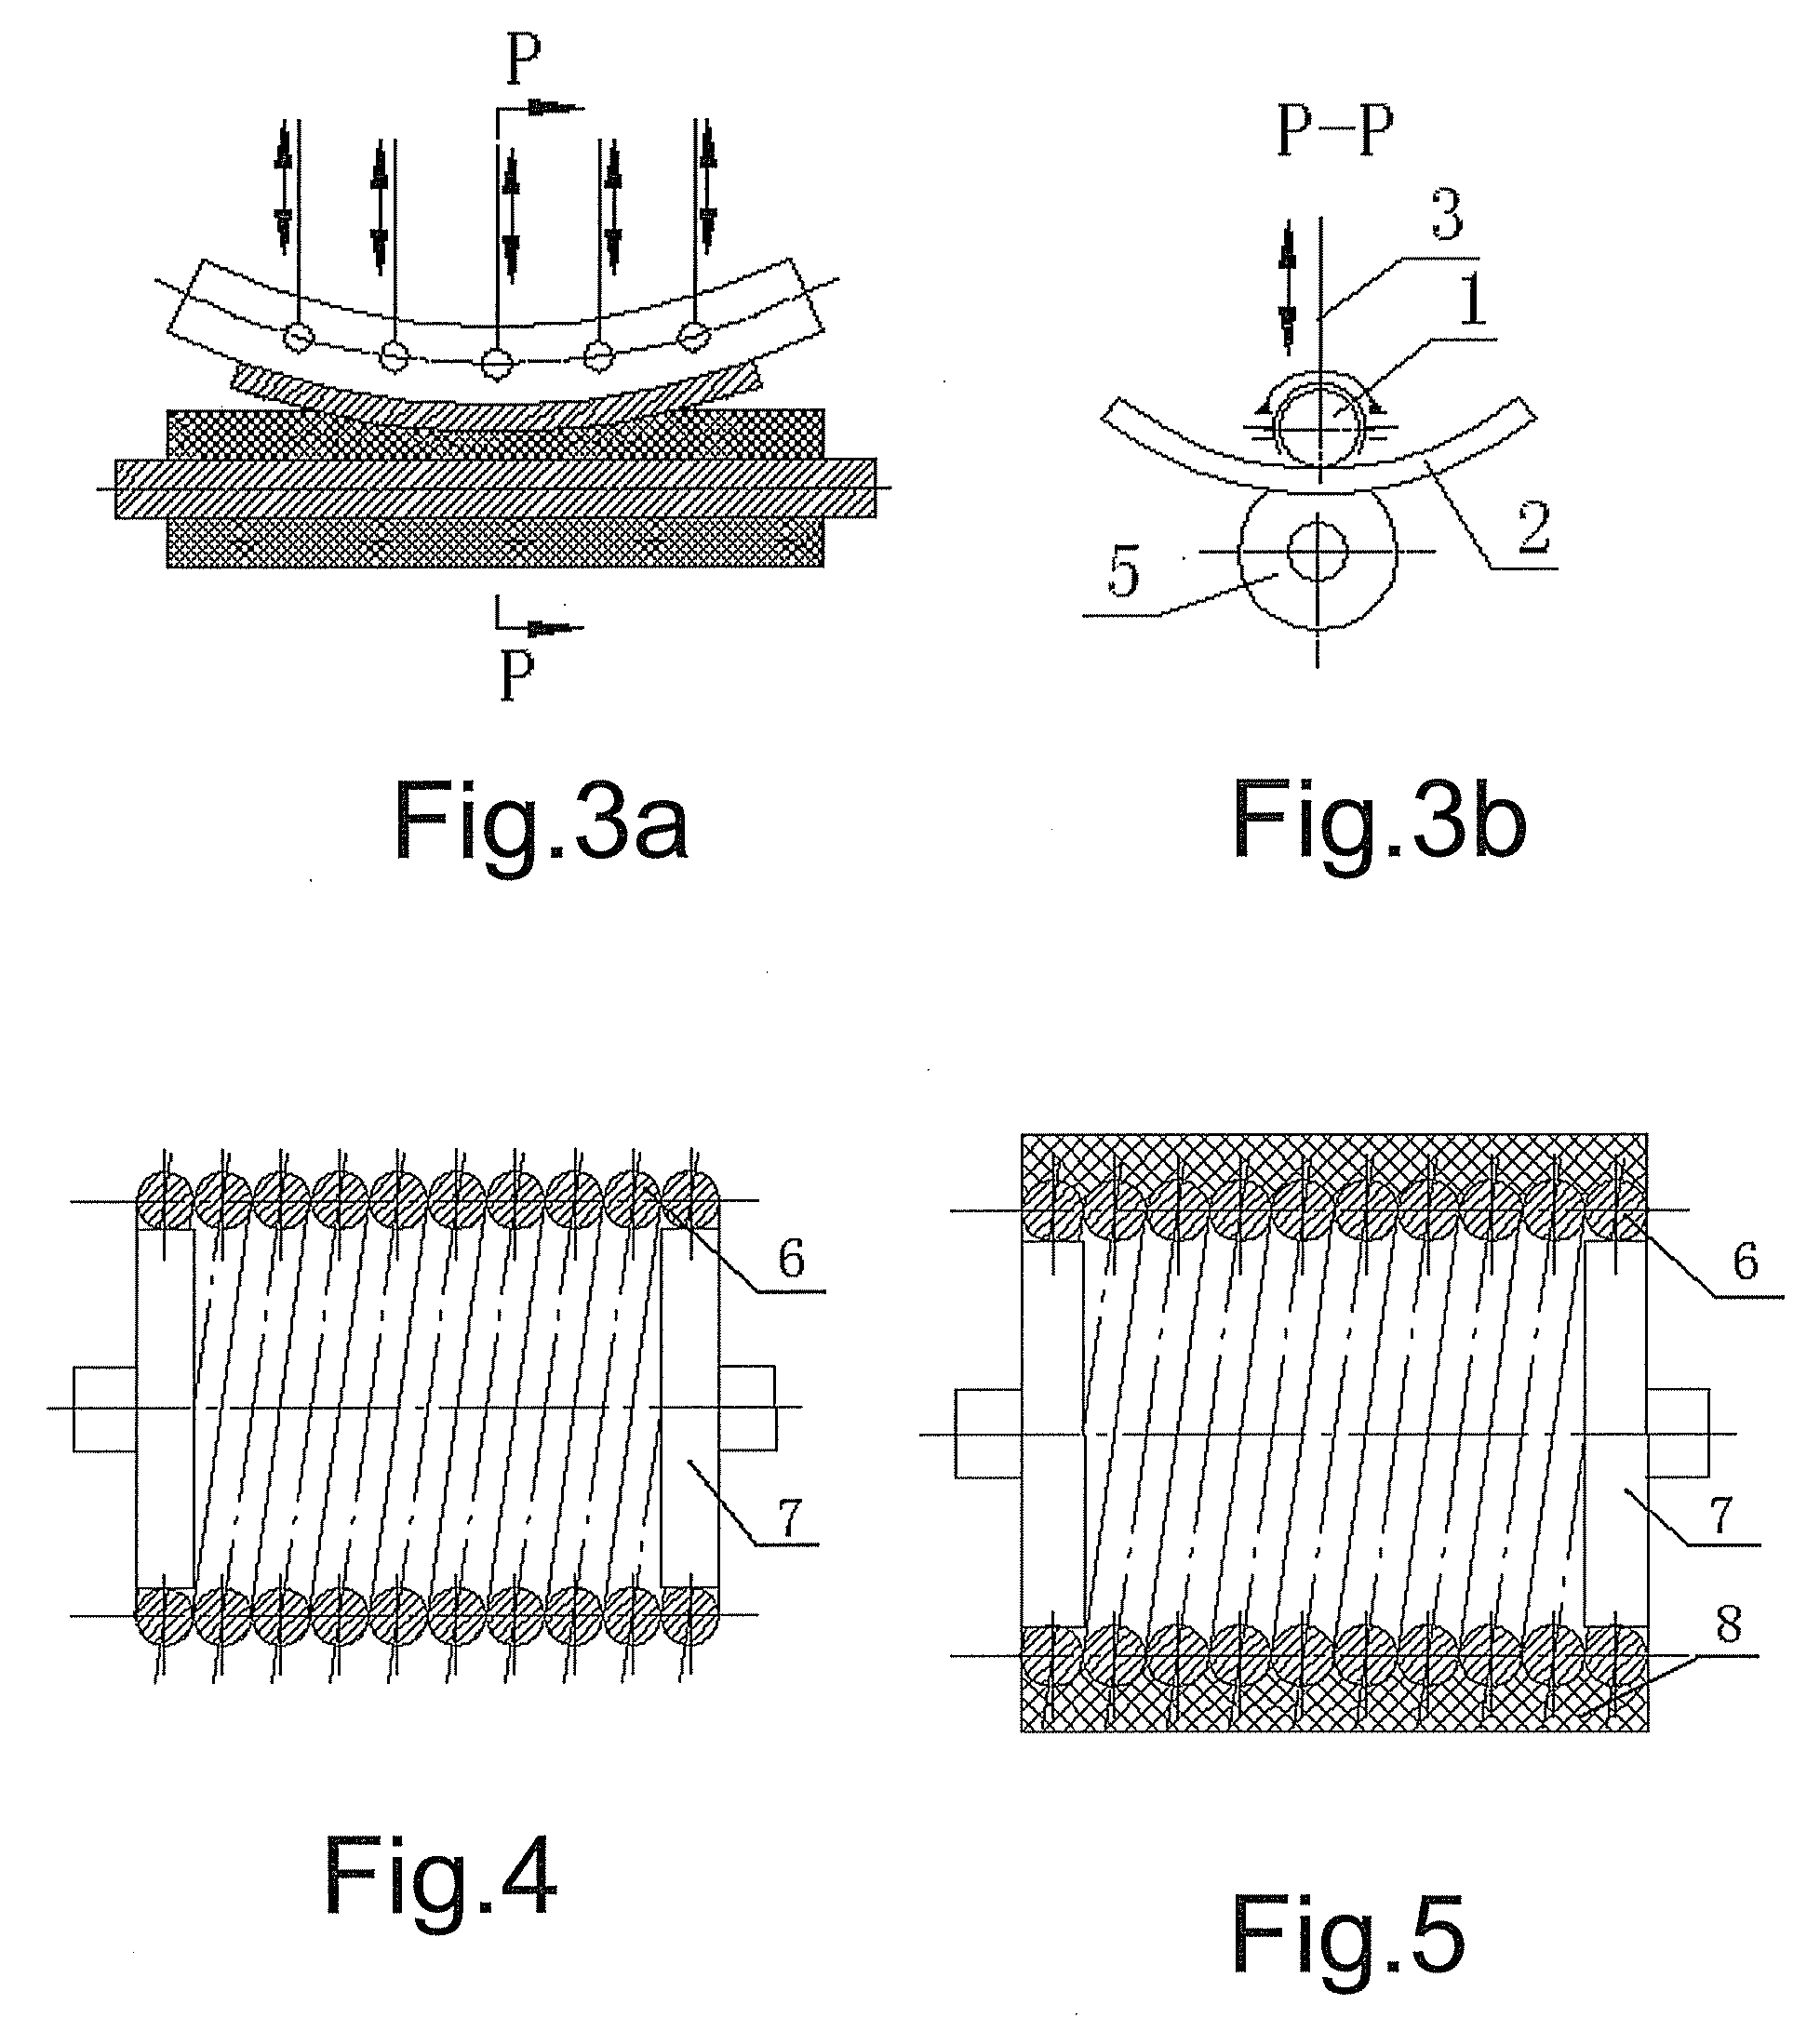 Flexible forming device for forming three-dimensional shaped workpieces